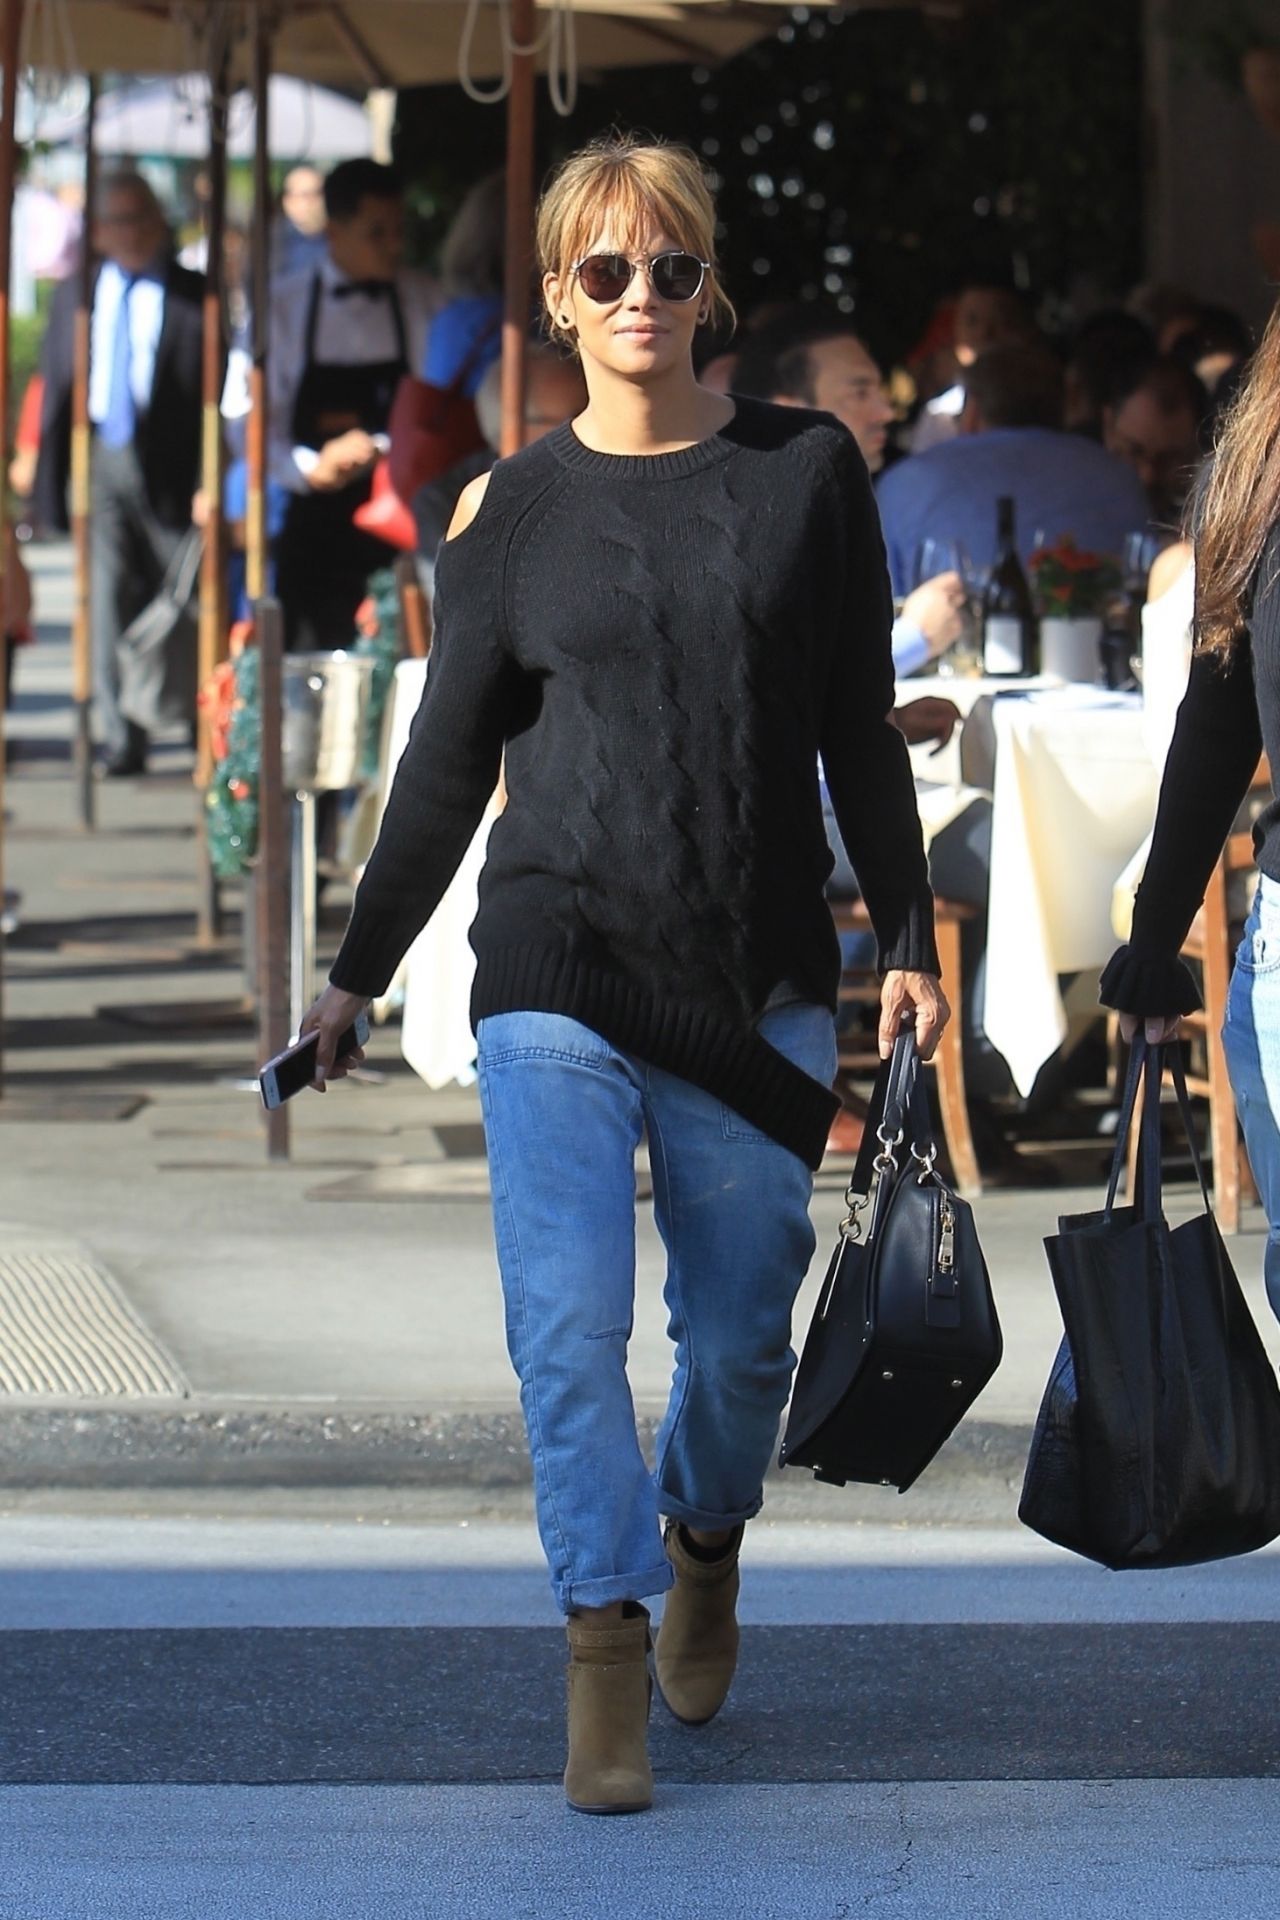 halle berry casual style 2018